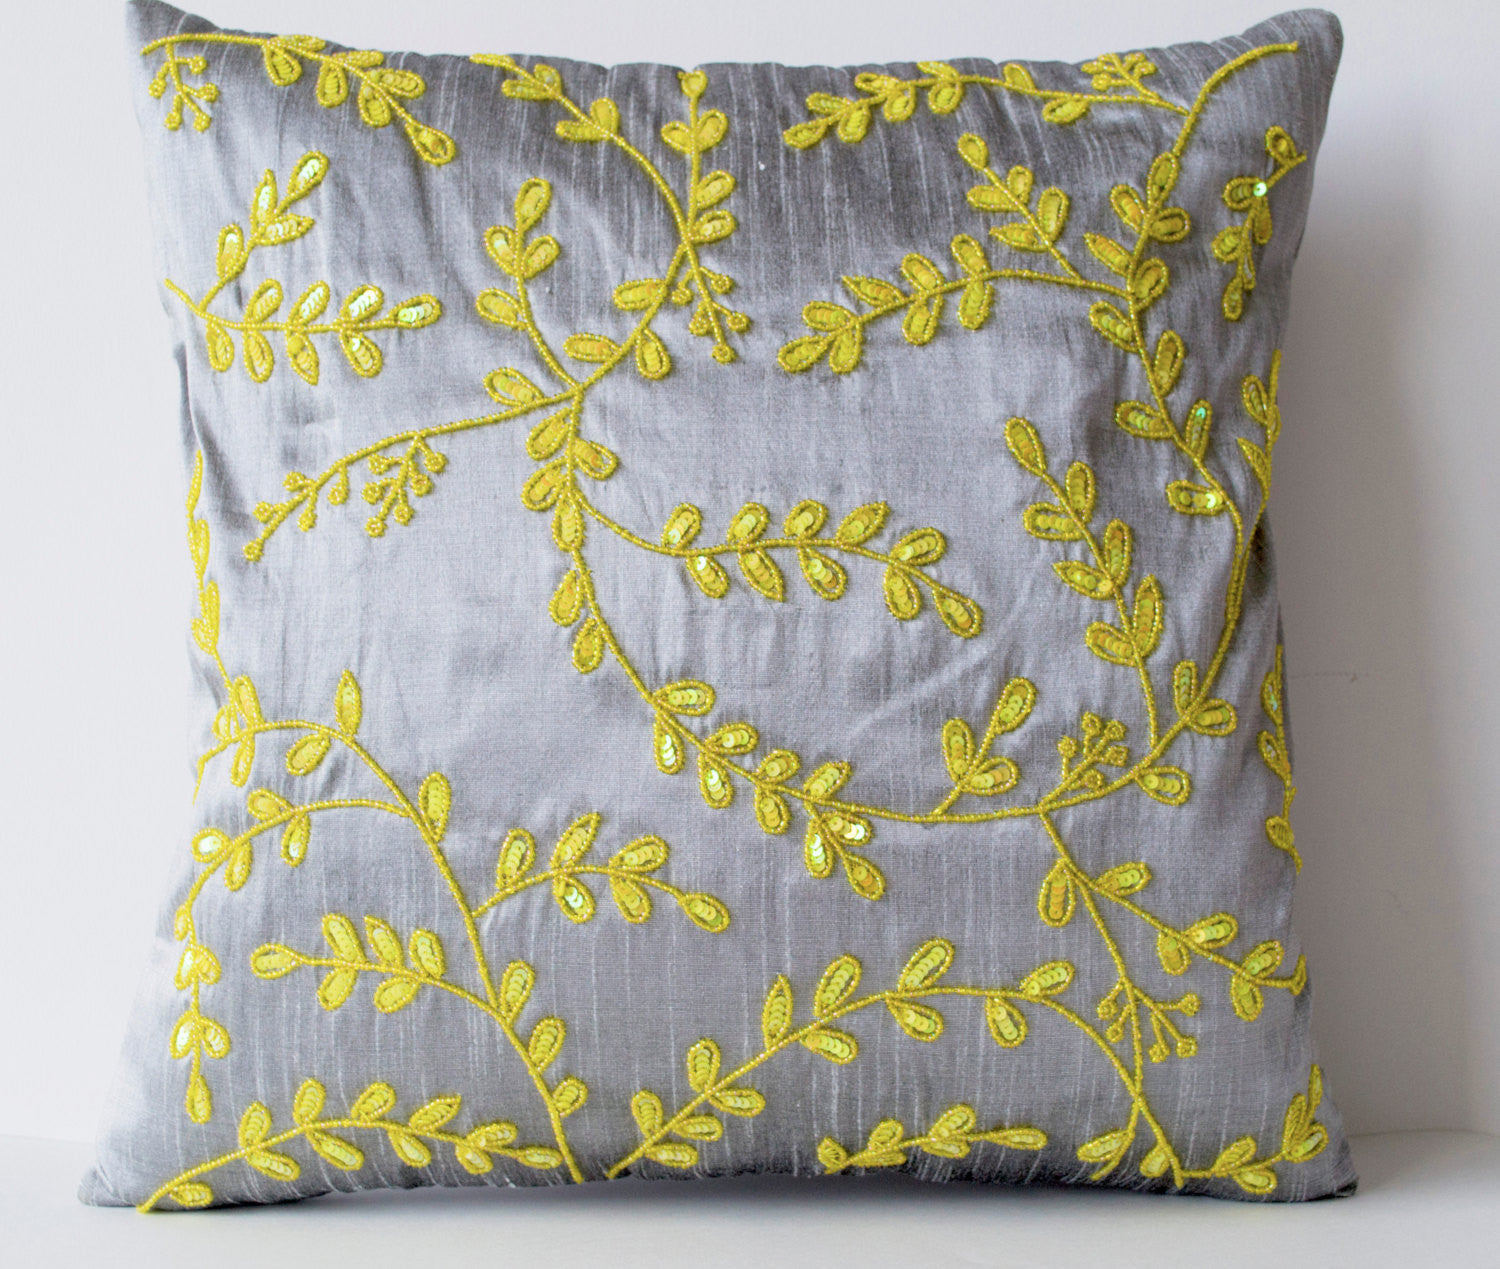 Shop online for handmade gray yellow silk throw pillows with beads ...